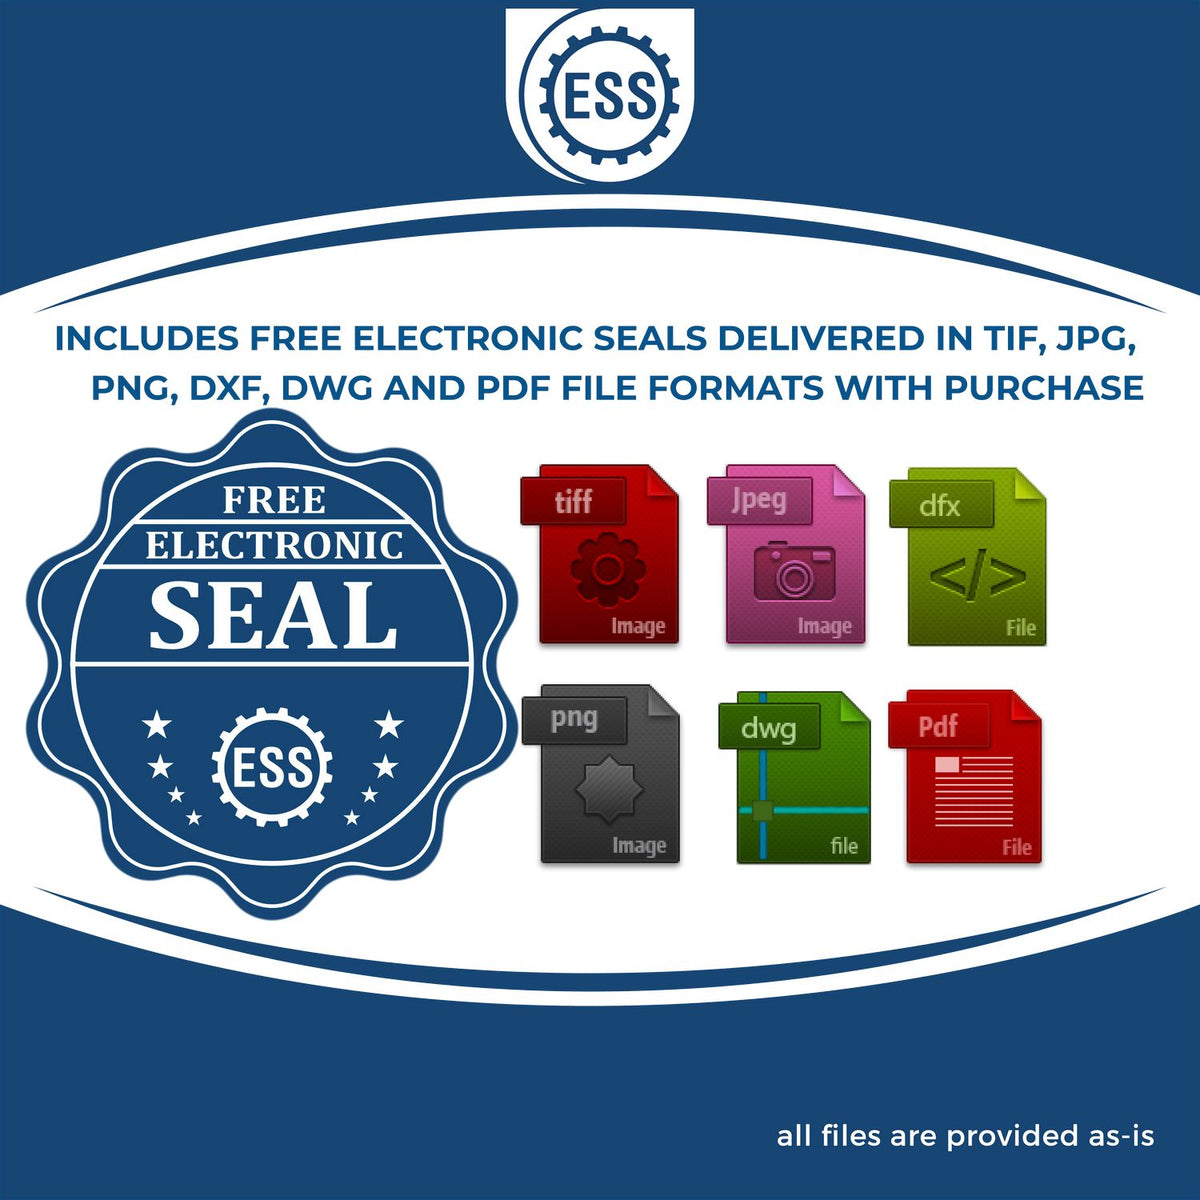 An infographic for the free electronic seal for the Hybrid Washington Land Surveyor Seal illustrating the different file type icons such as DXF, DWG, TIF, JPG and PNG.